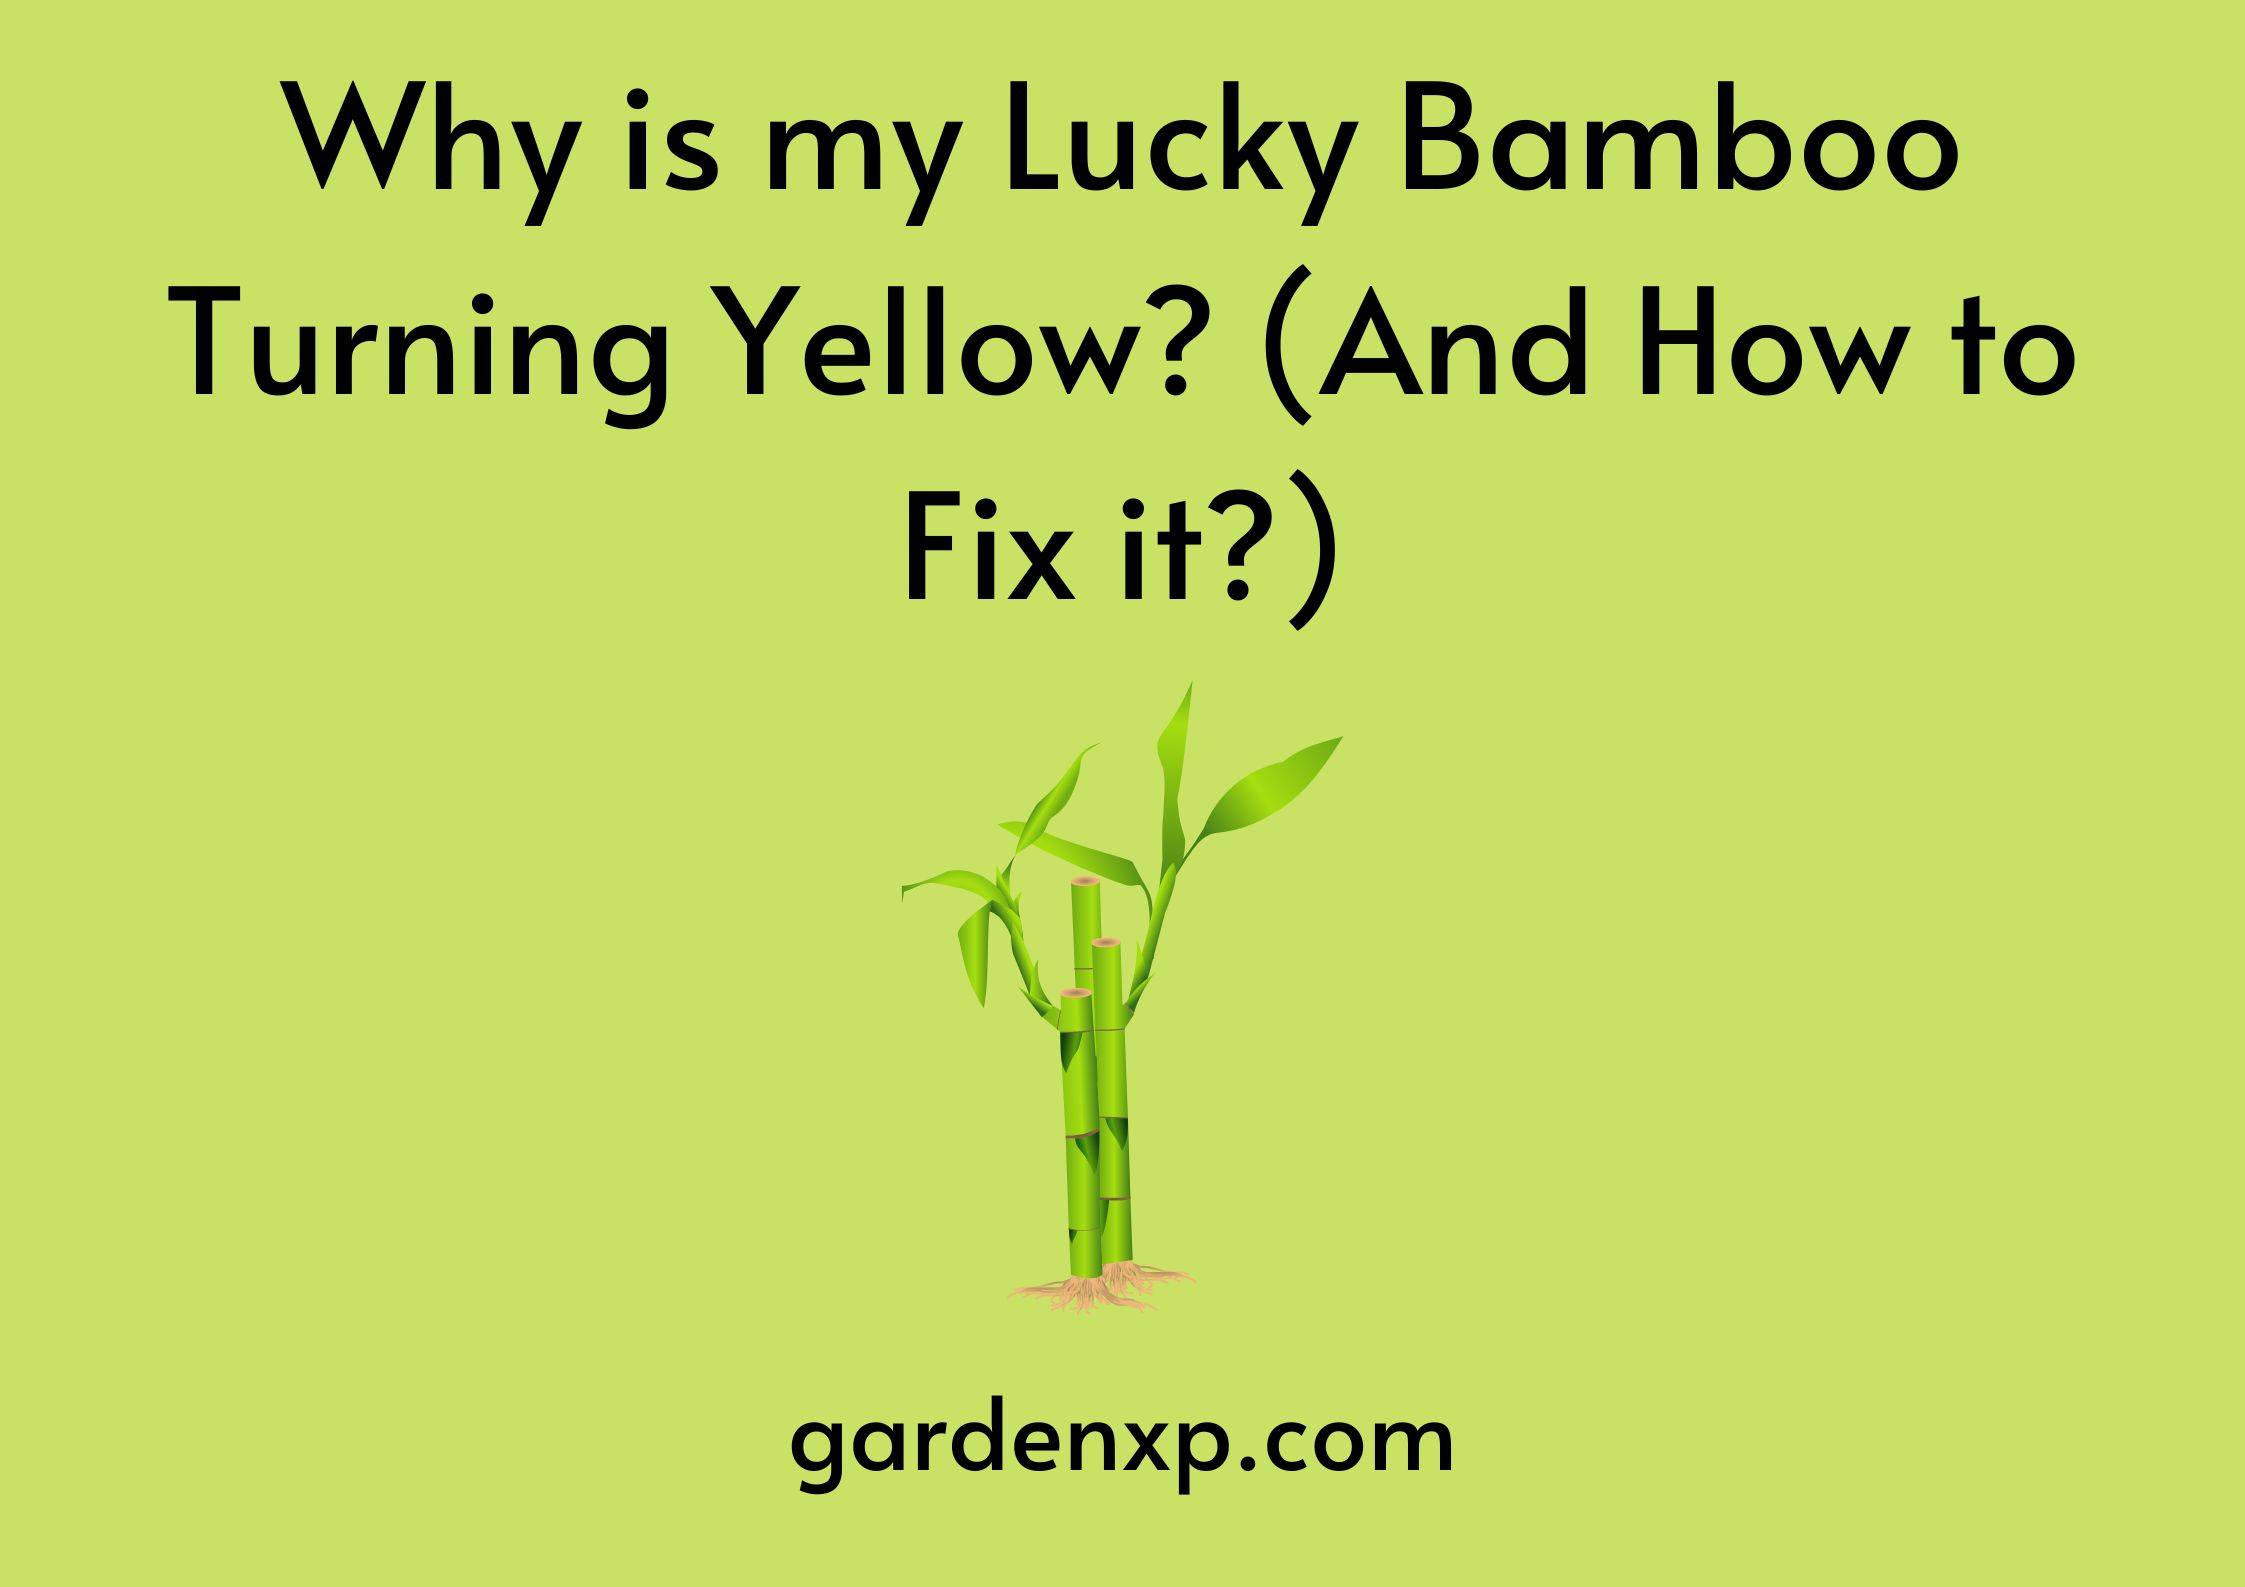 Why is my Lucky Bamboo Turning Yellow? (And How to Fix it)